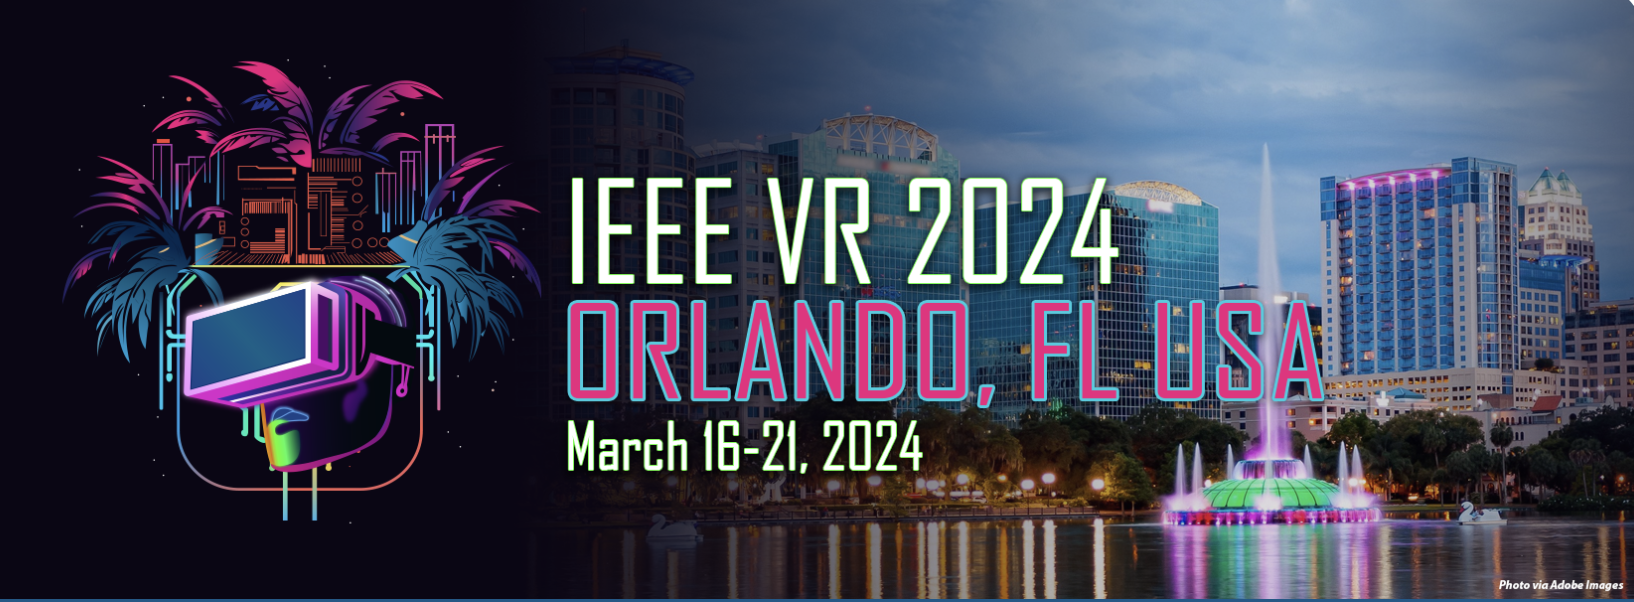 Banner image for IEEE VR 2024 Conference on March 16-21 with a backdrop of Orlando, Florida and an animation icon of a face with a VR headset, and tropical plants.